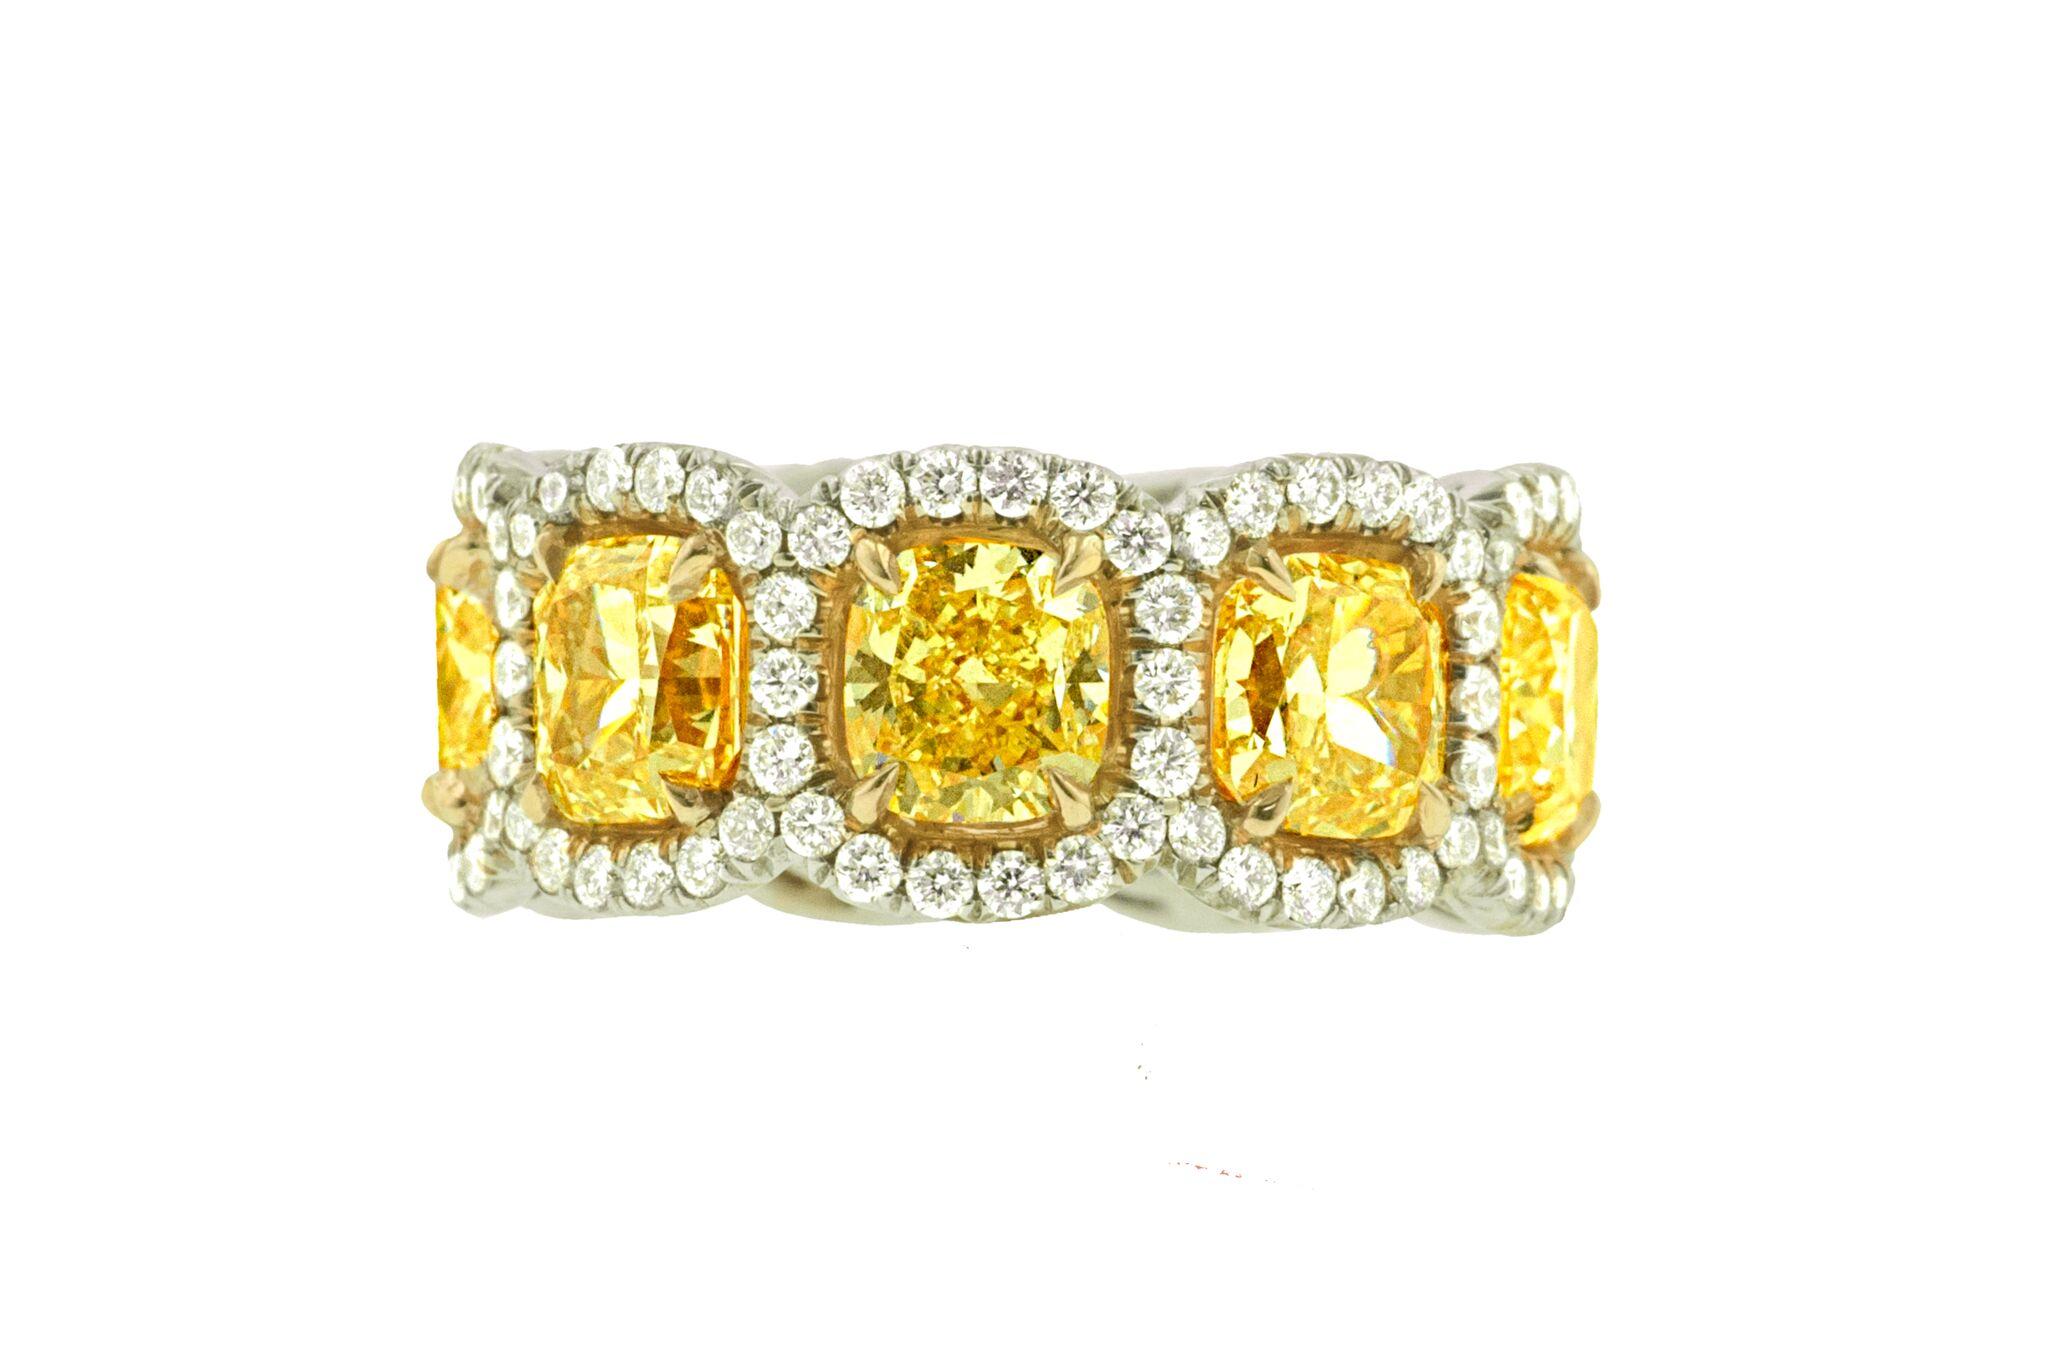 Diana M. 11.22 Ct Fancy Yellow Diamond Eternity Band  In New Condition For Sale In New York, NY